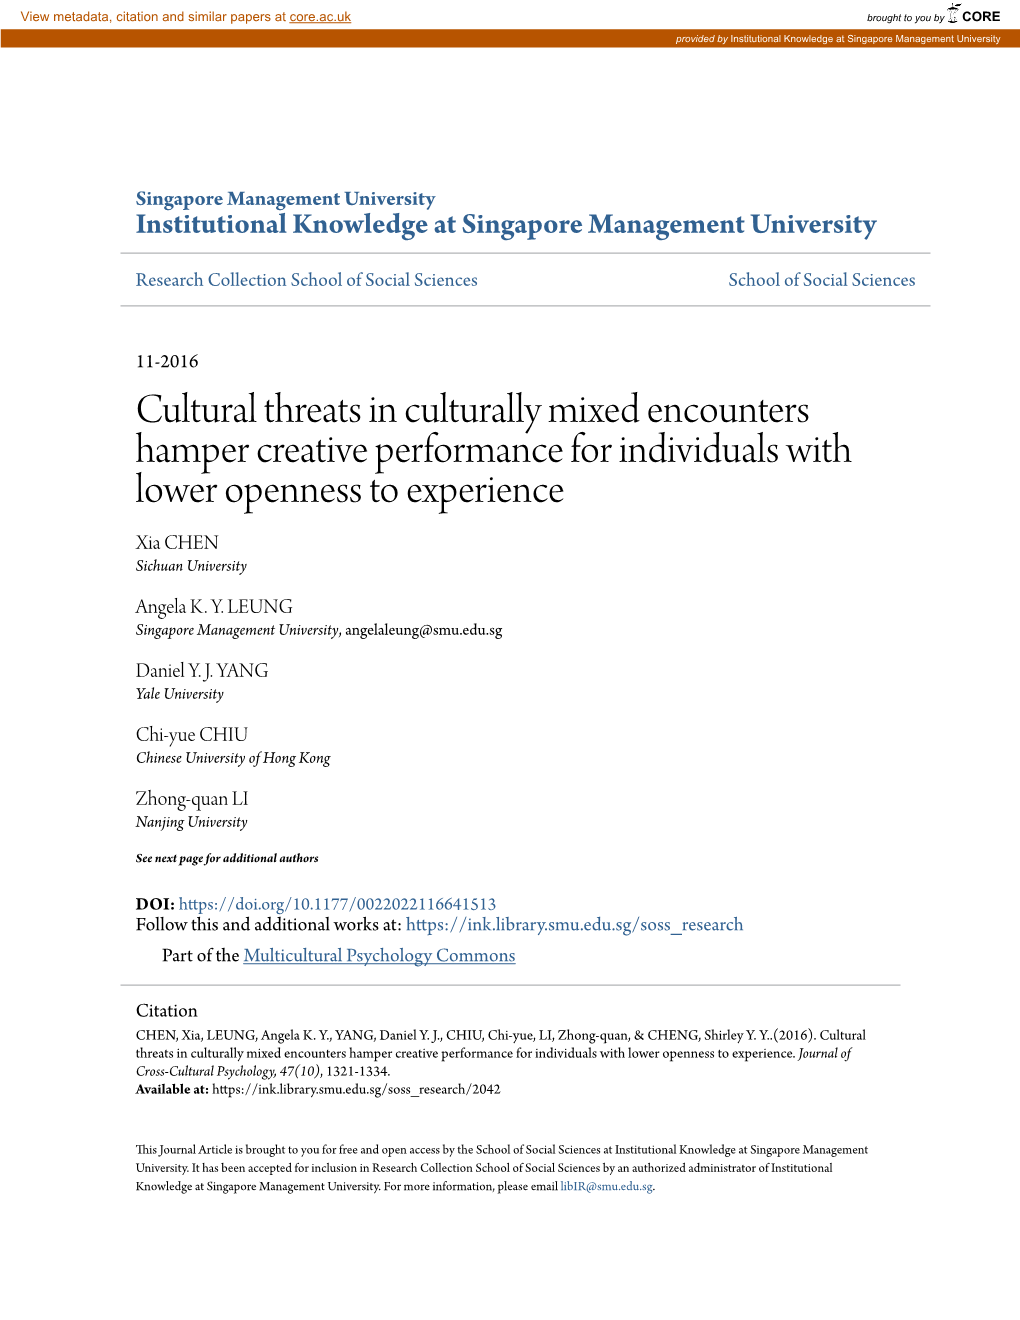 Cultural Threats in Culturally Mixed Encounters Hamper Creative Performance for Individuals with Lower Openness to Experience Xia CHEN Sichuan University